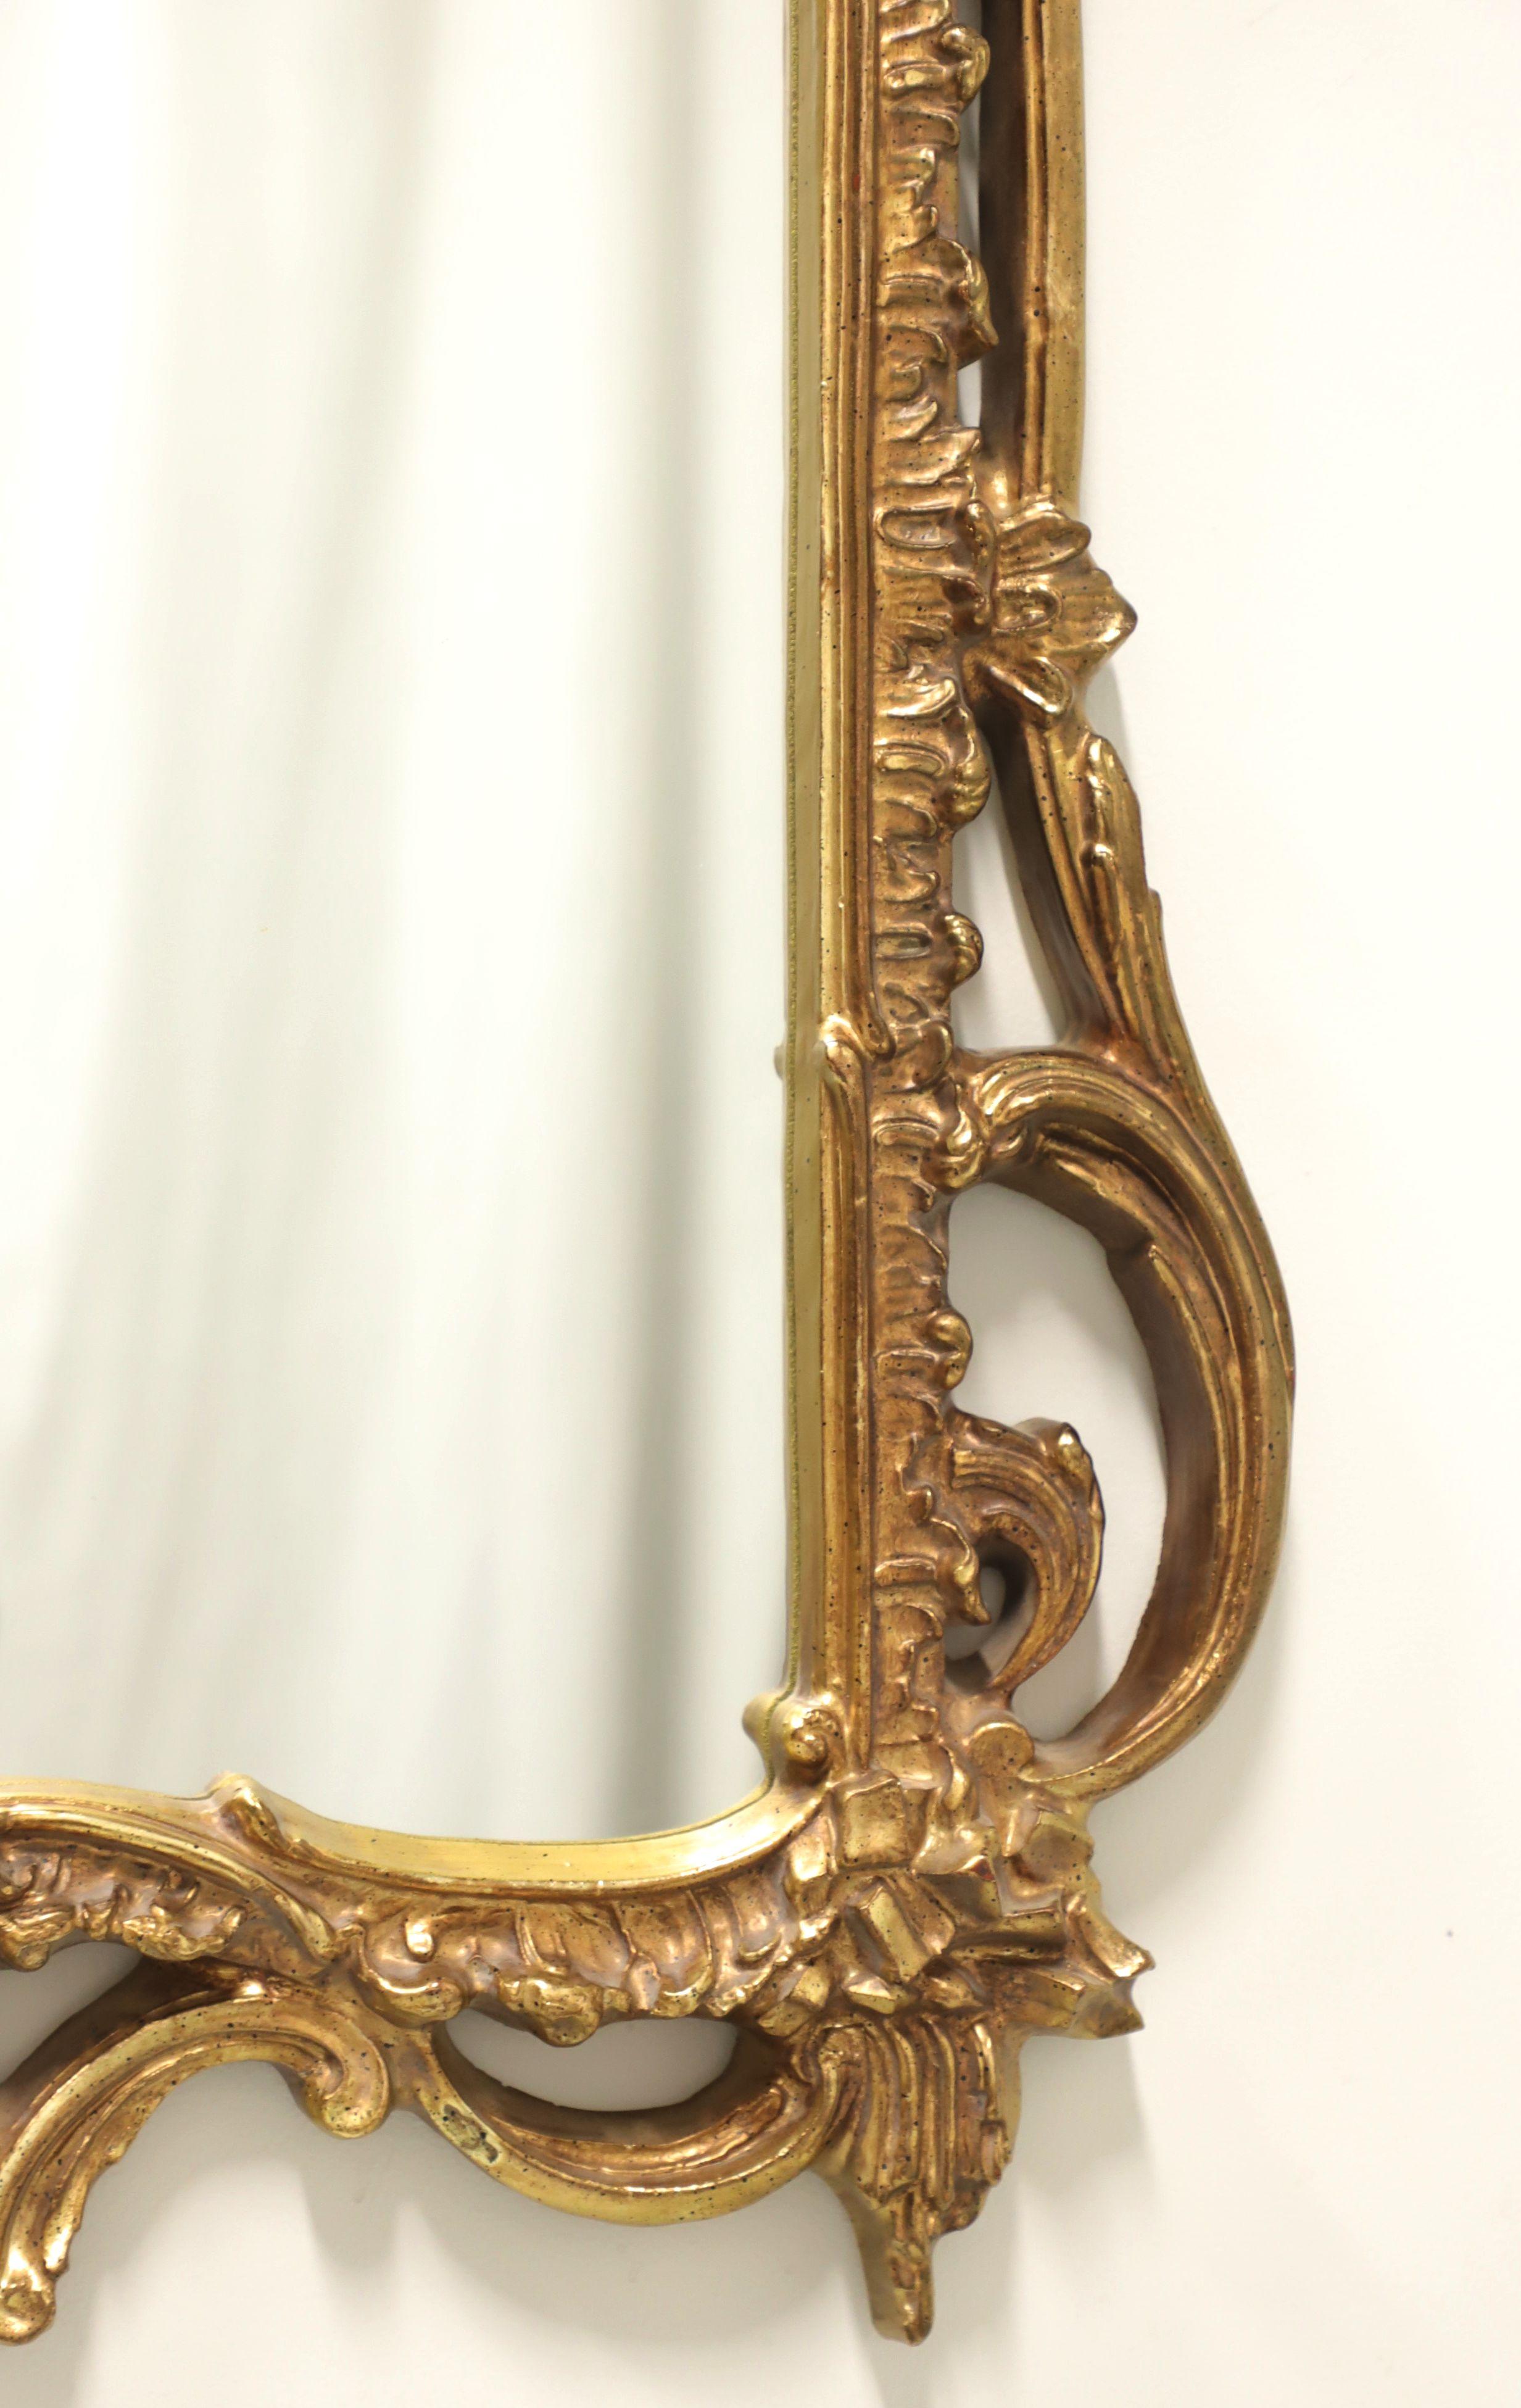 CAROLINA MIRROR Rococo Style Gold Gilt Wall Mirror In Good Condition For Sale In Charlotte, NC